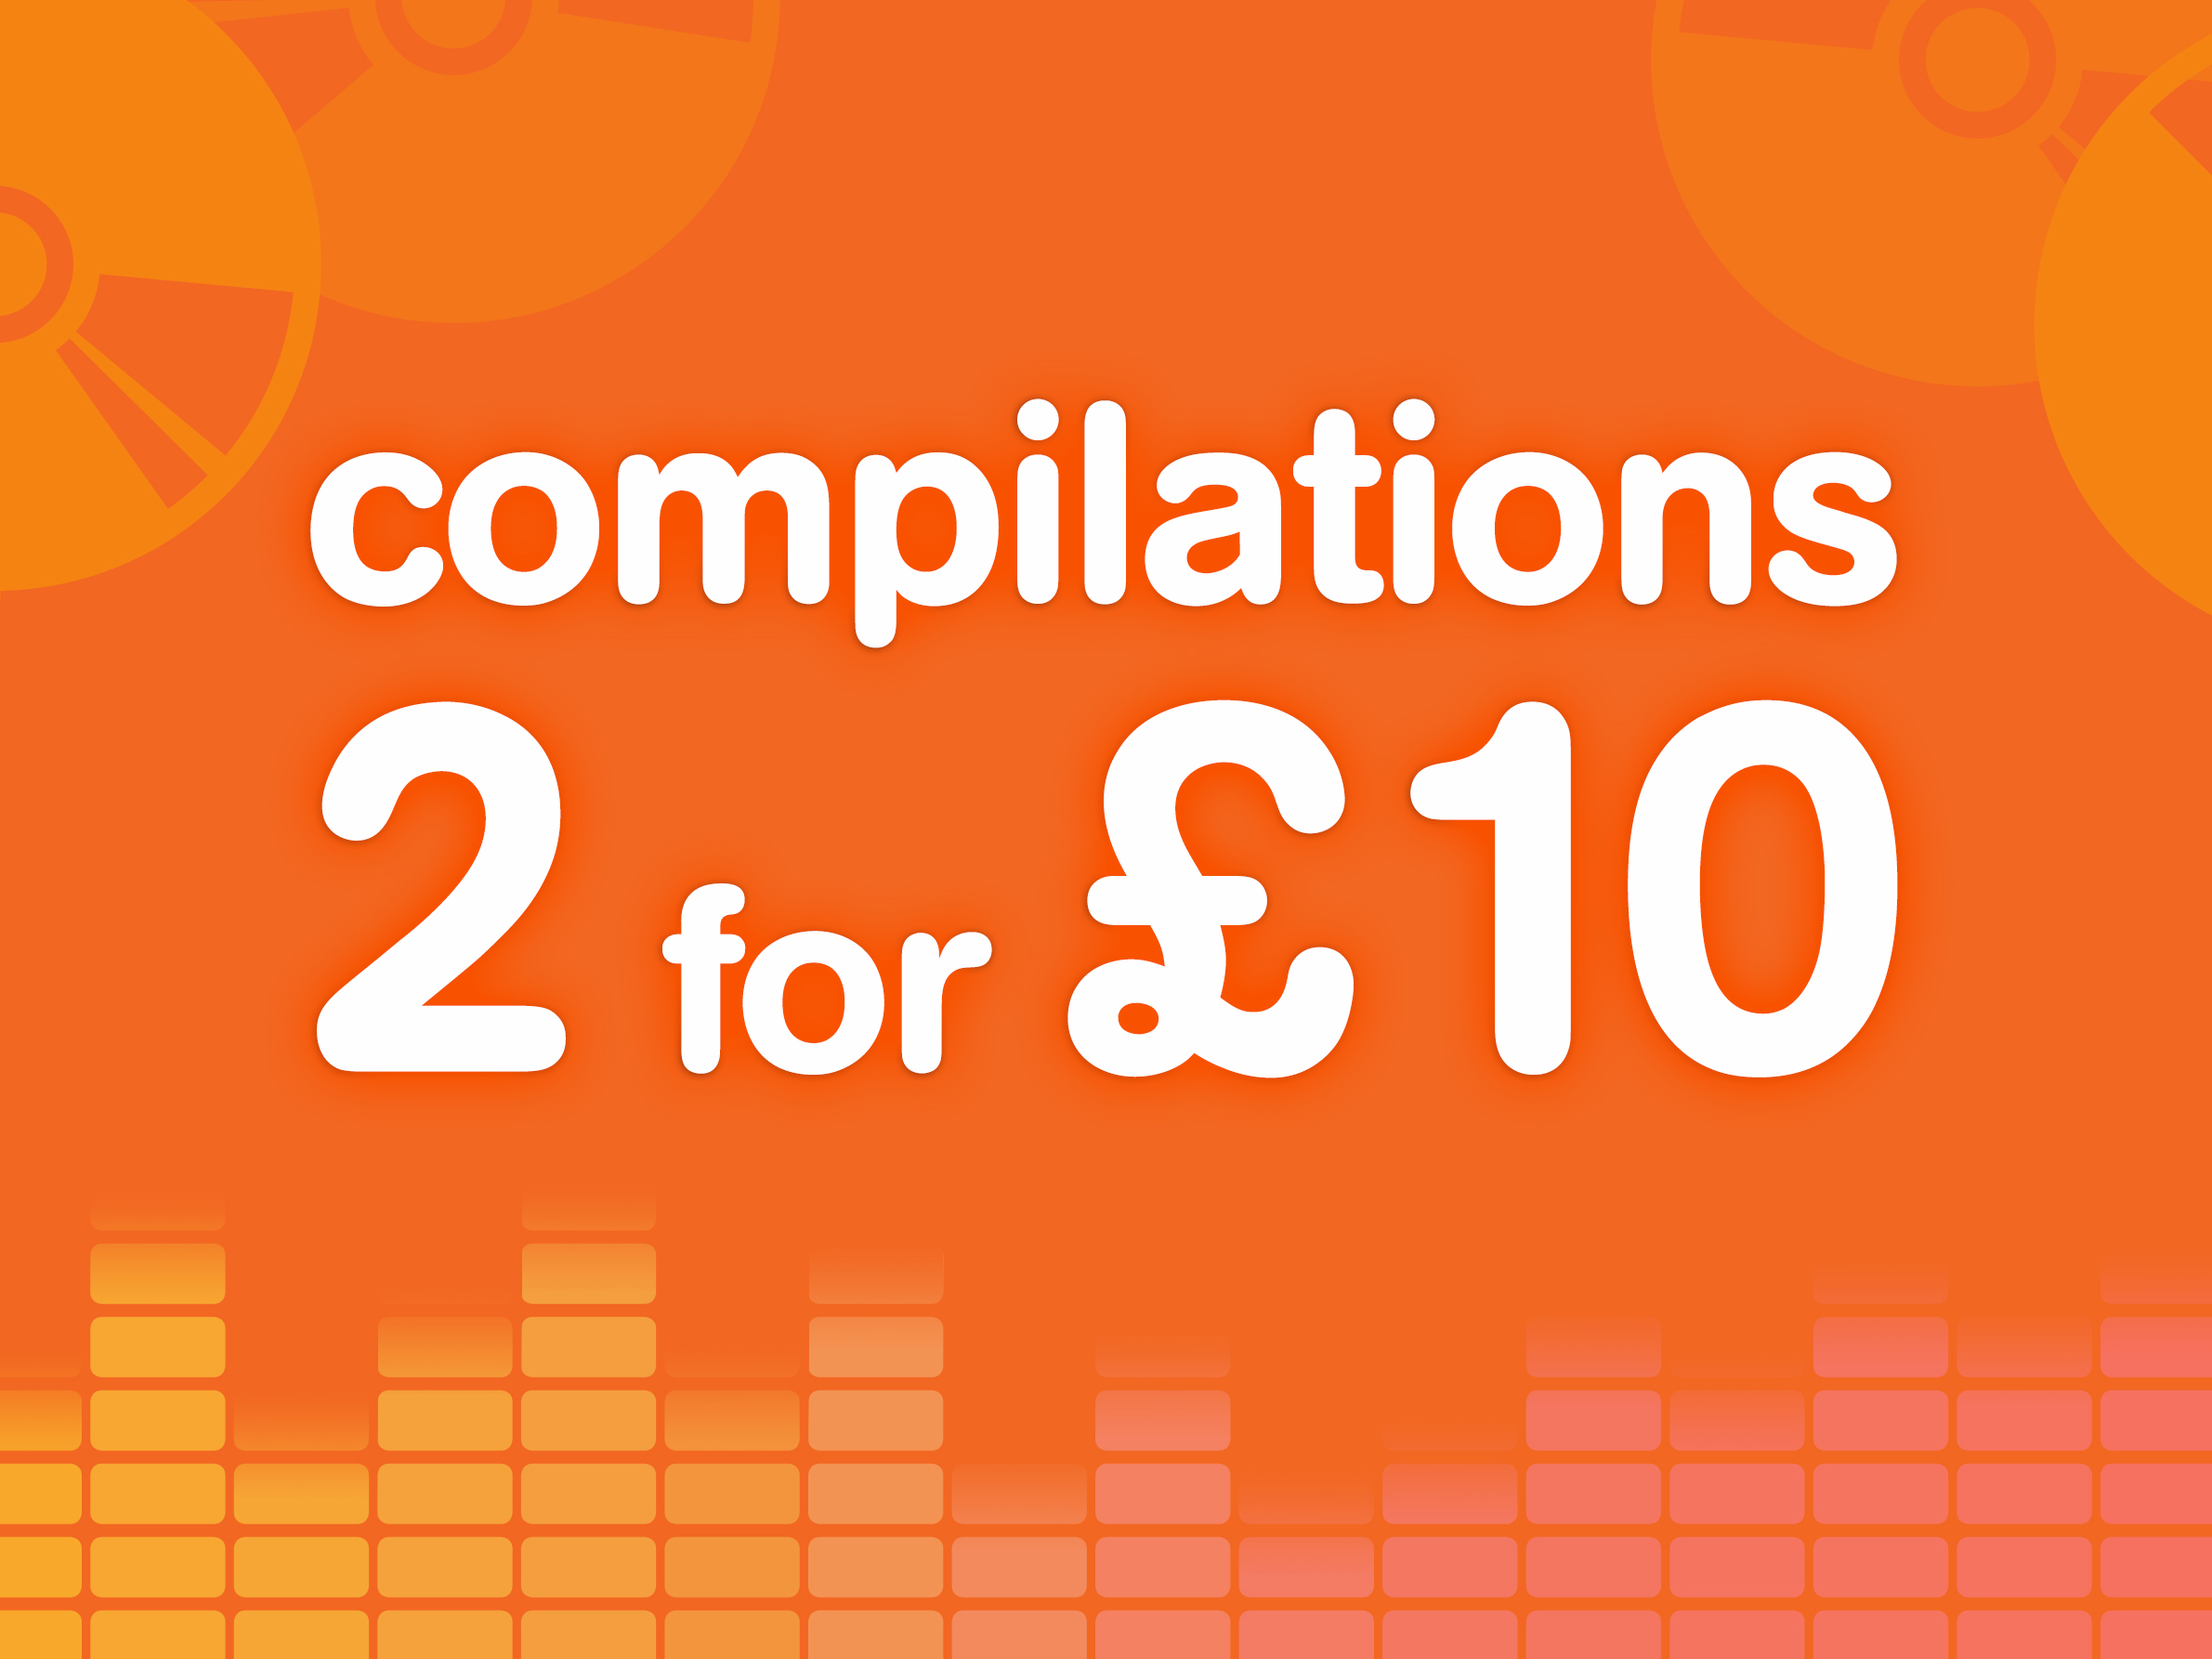 Compilations 2 for £10 CD